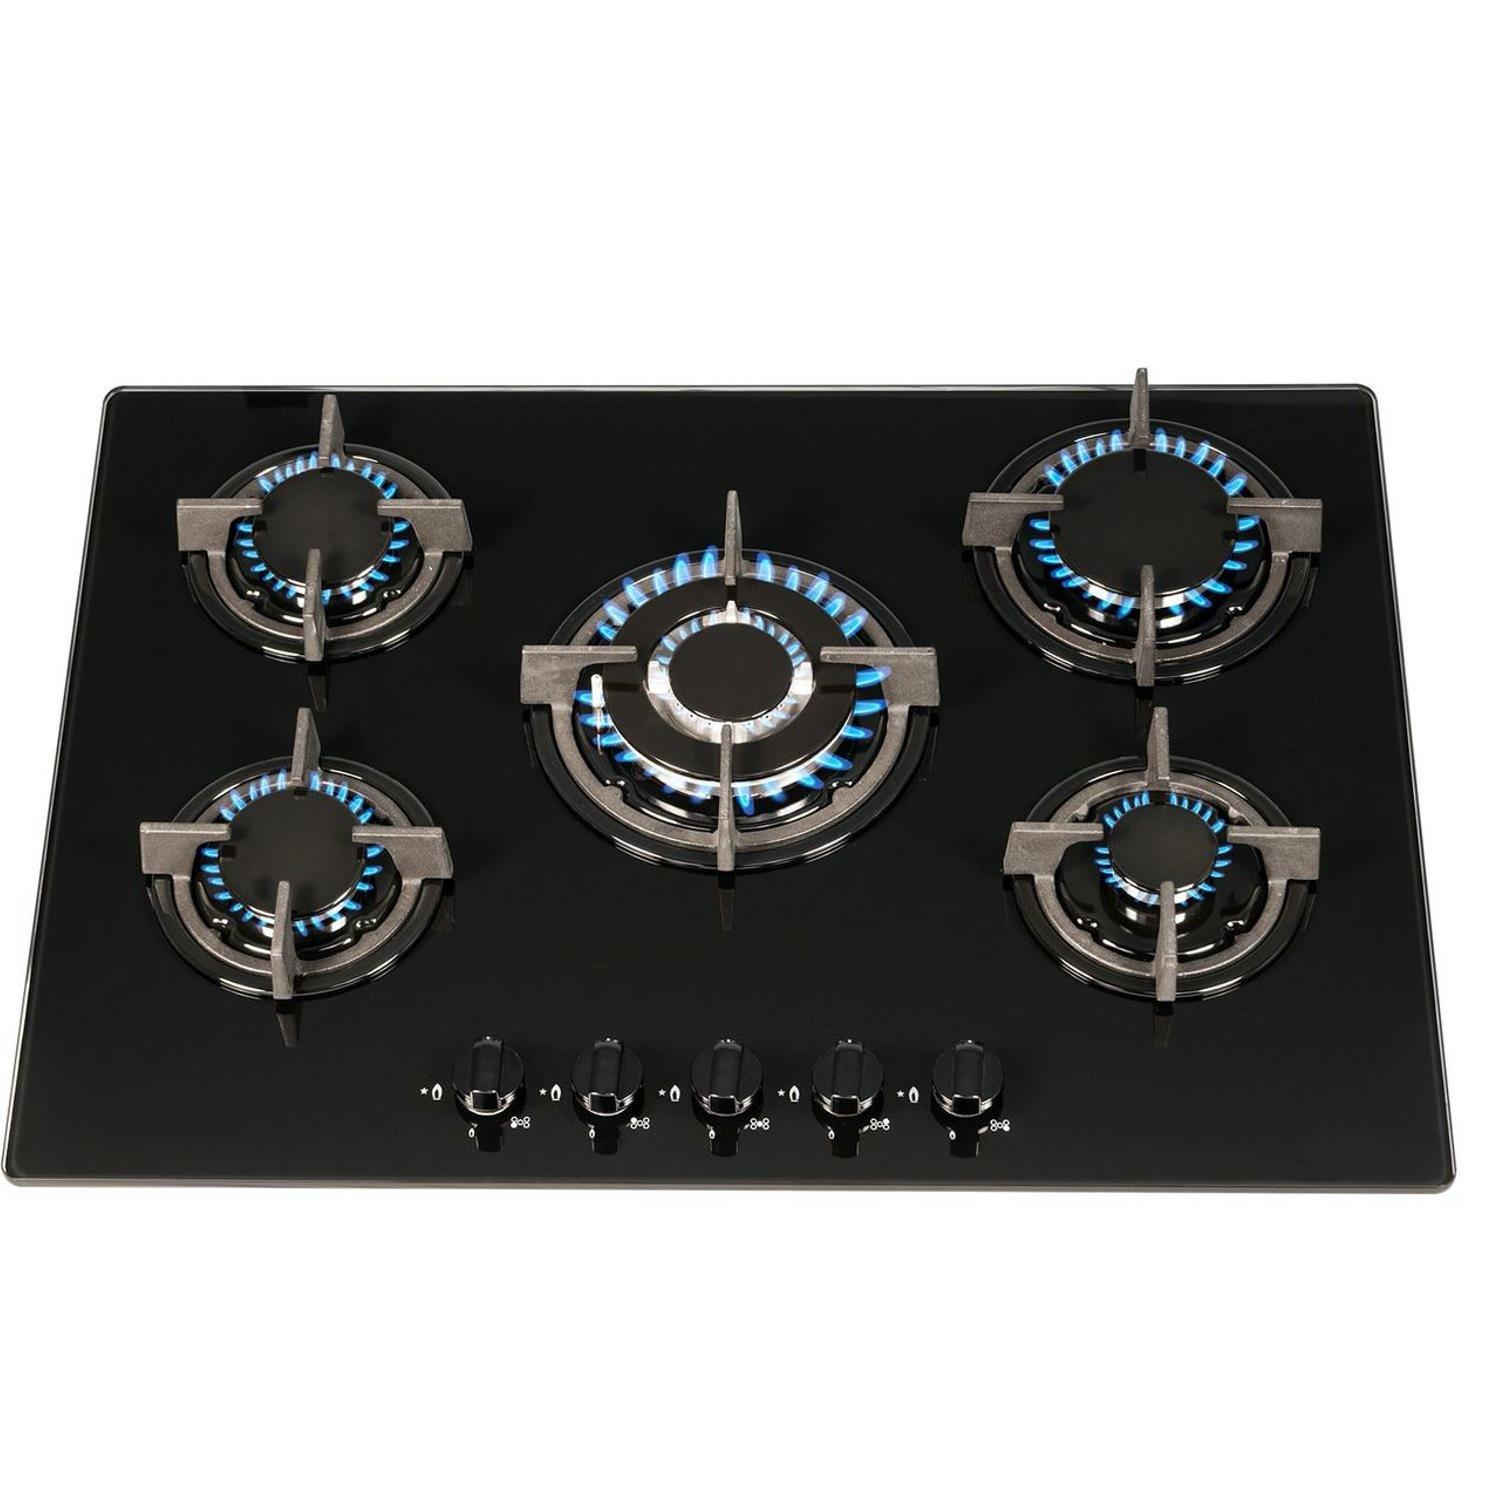 70cm Black 5 Burner Gas On Glass Hob With Cast Iron Pan Stands- GHG703BL